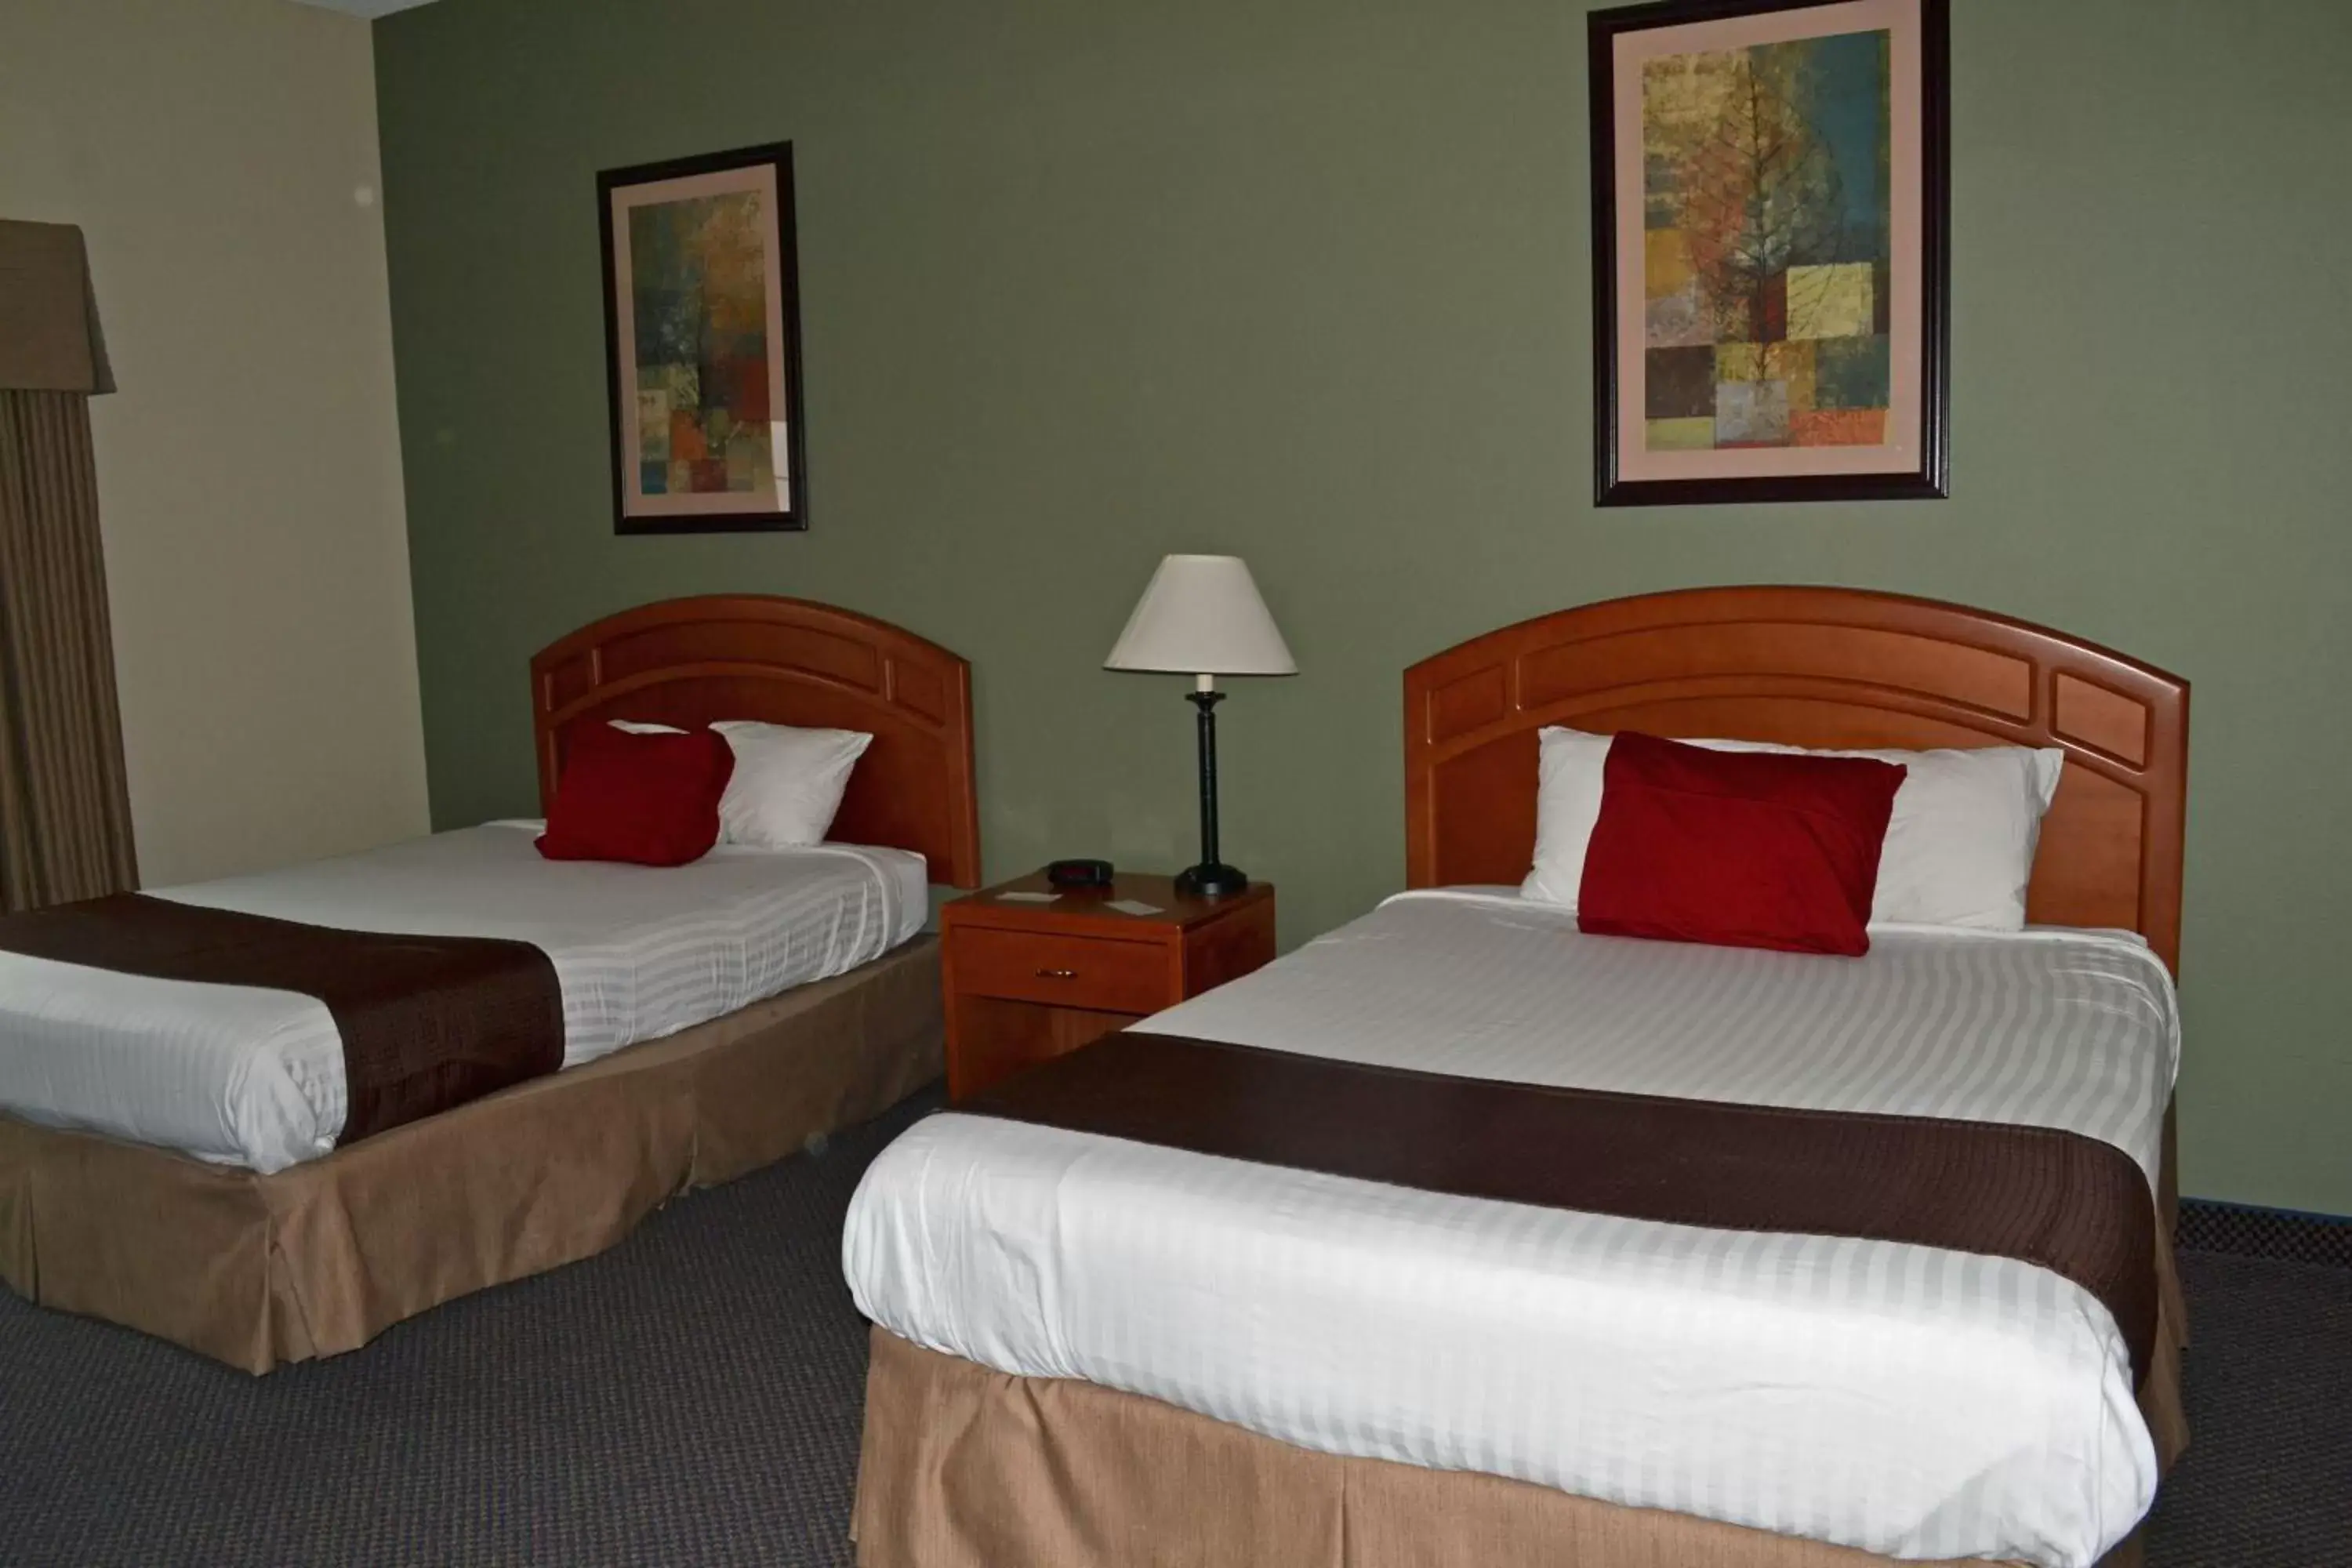 Bedroom, Room Photo in Paola Inn and Suites